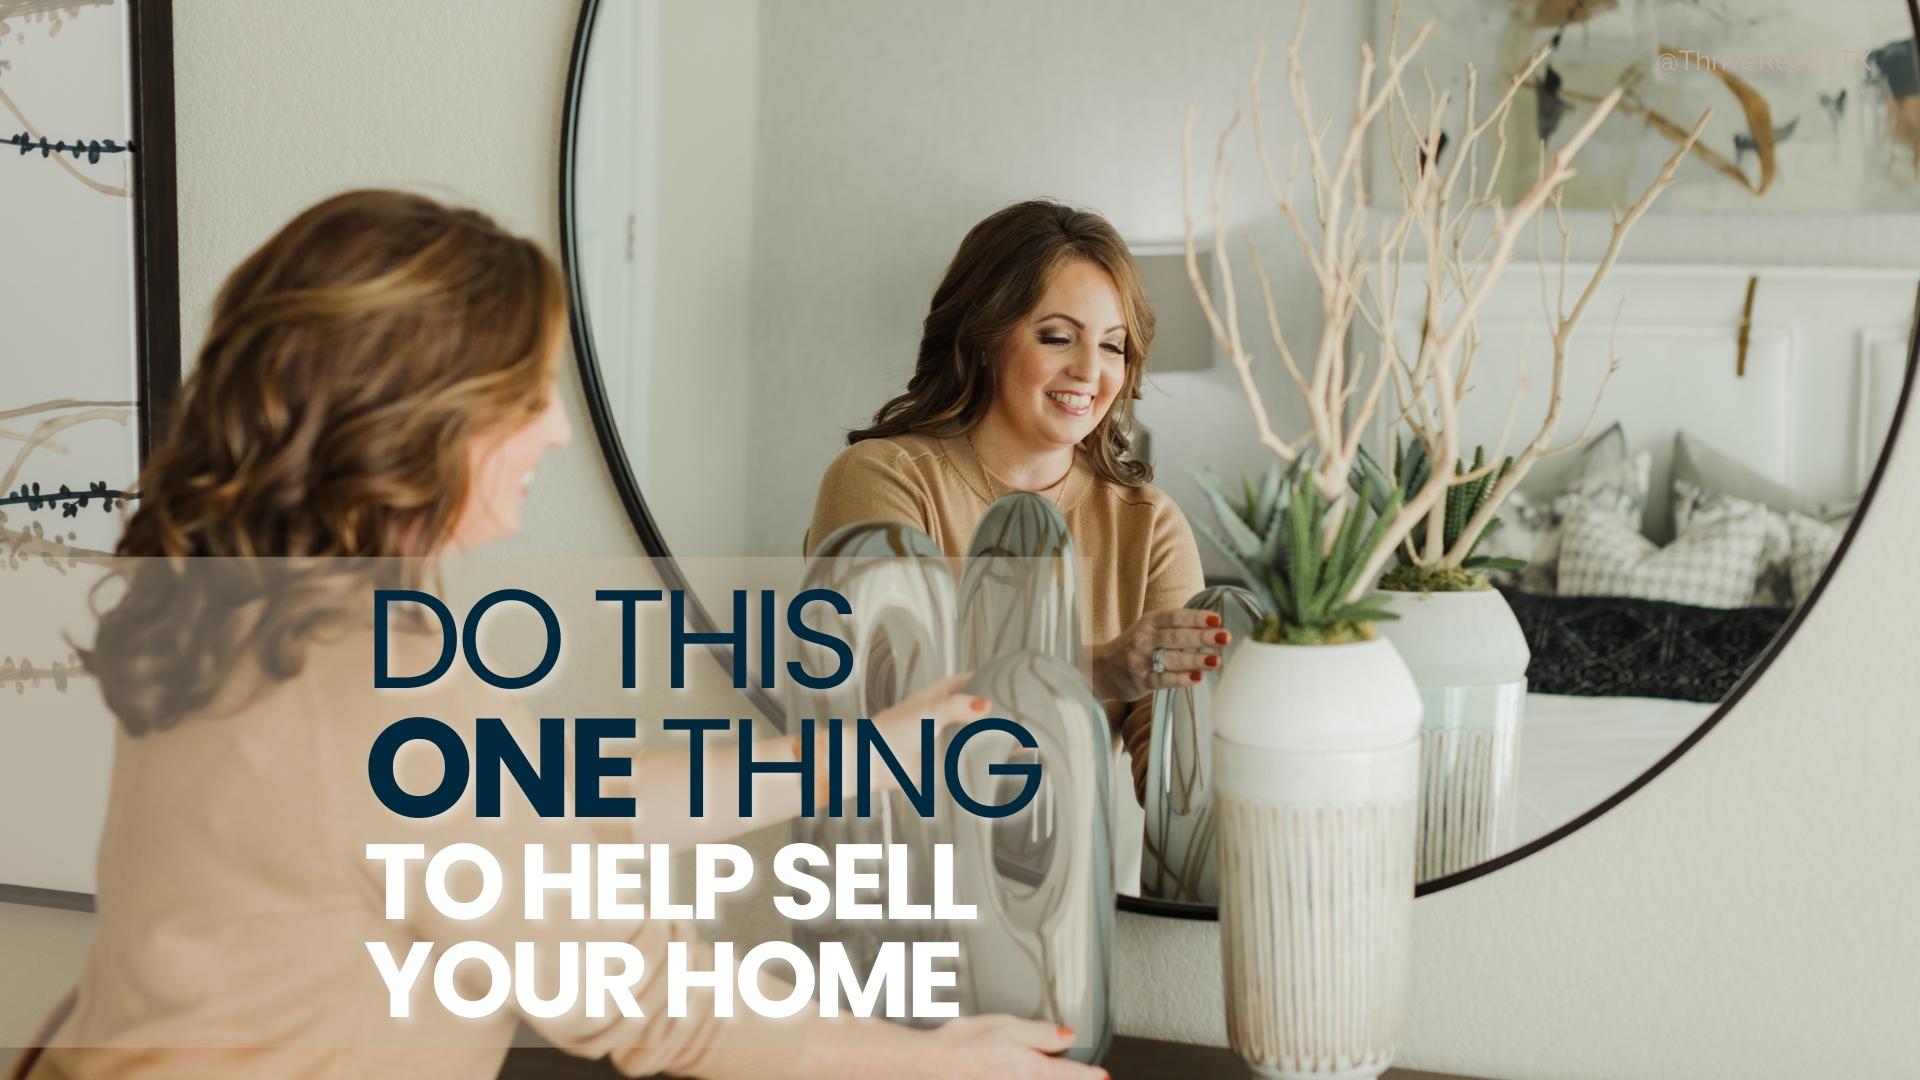 Declutter your home to help your home sell